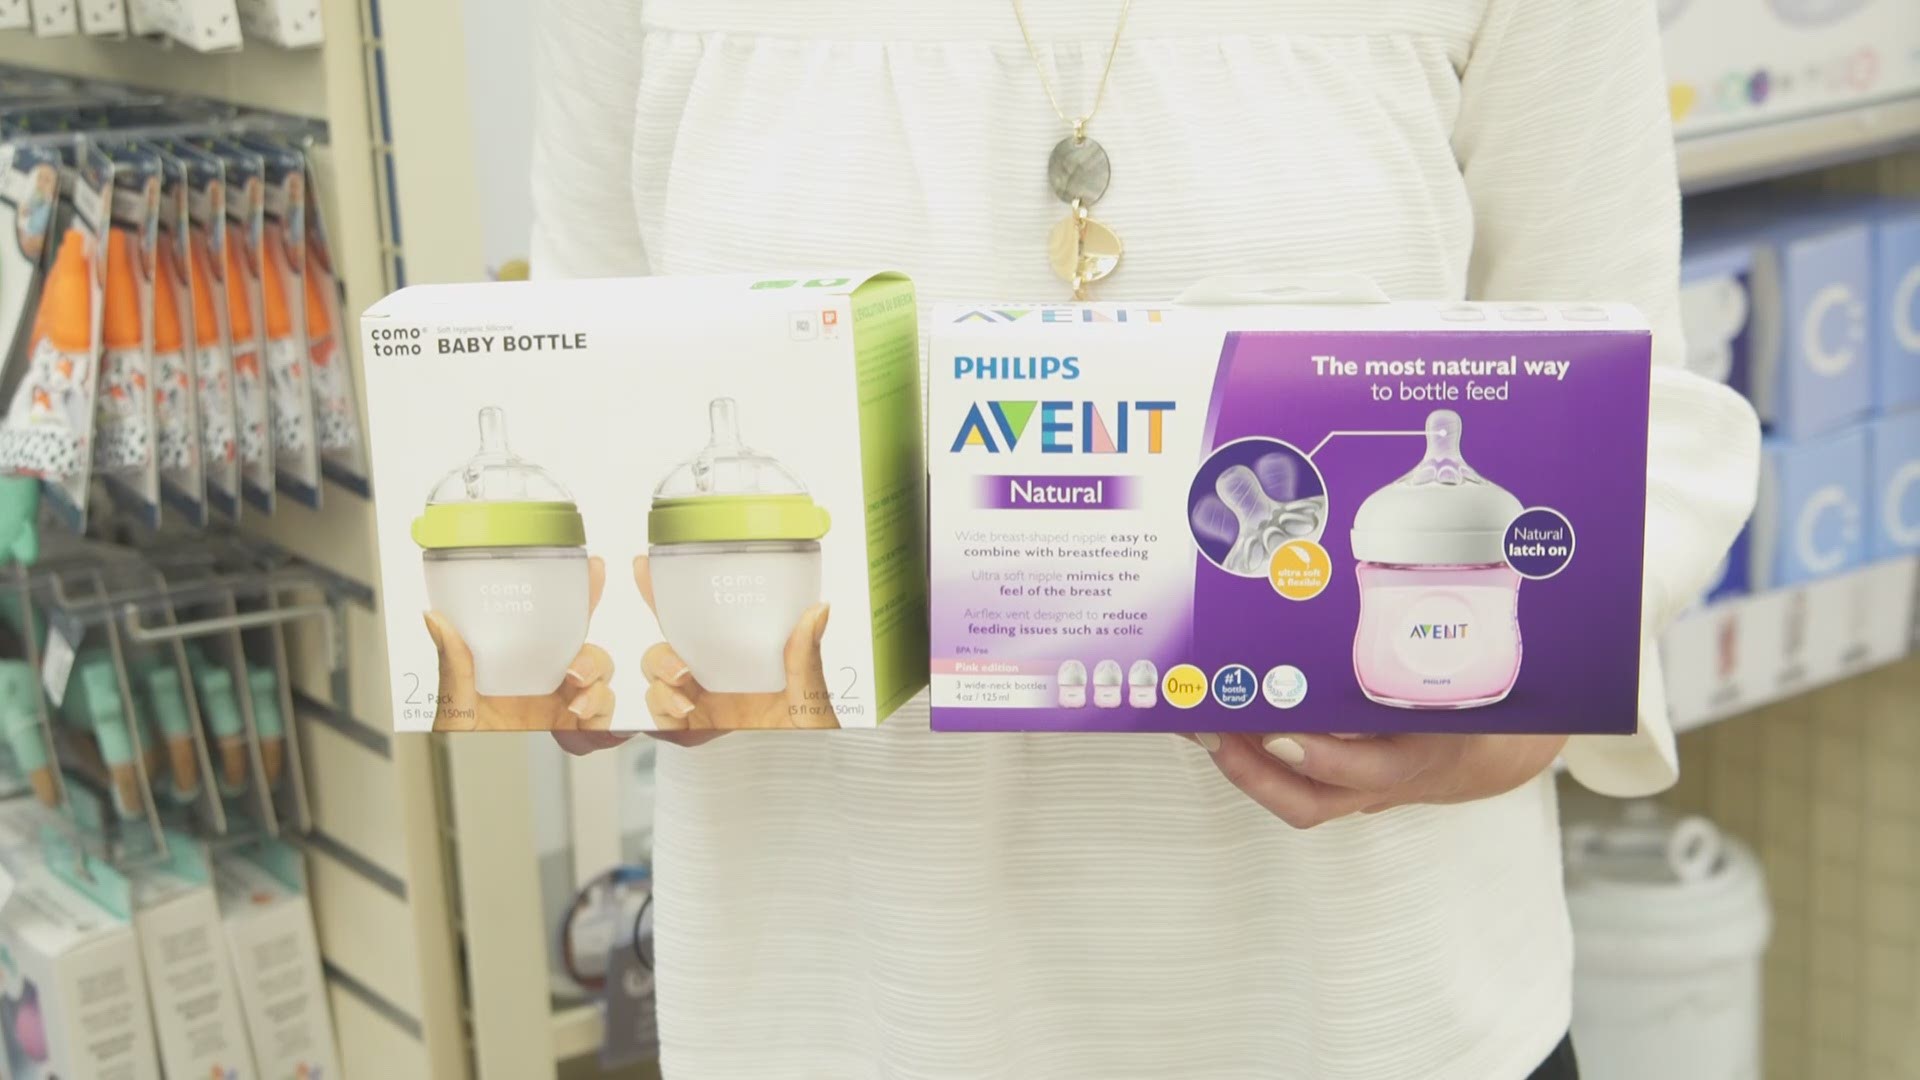 3News' Sara Shookman explores the various baby bottles on the market. She even gets tips from an expert on the benefits of each bottle type.